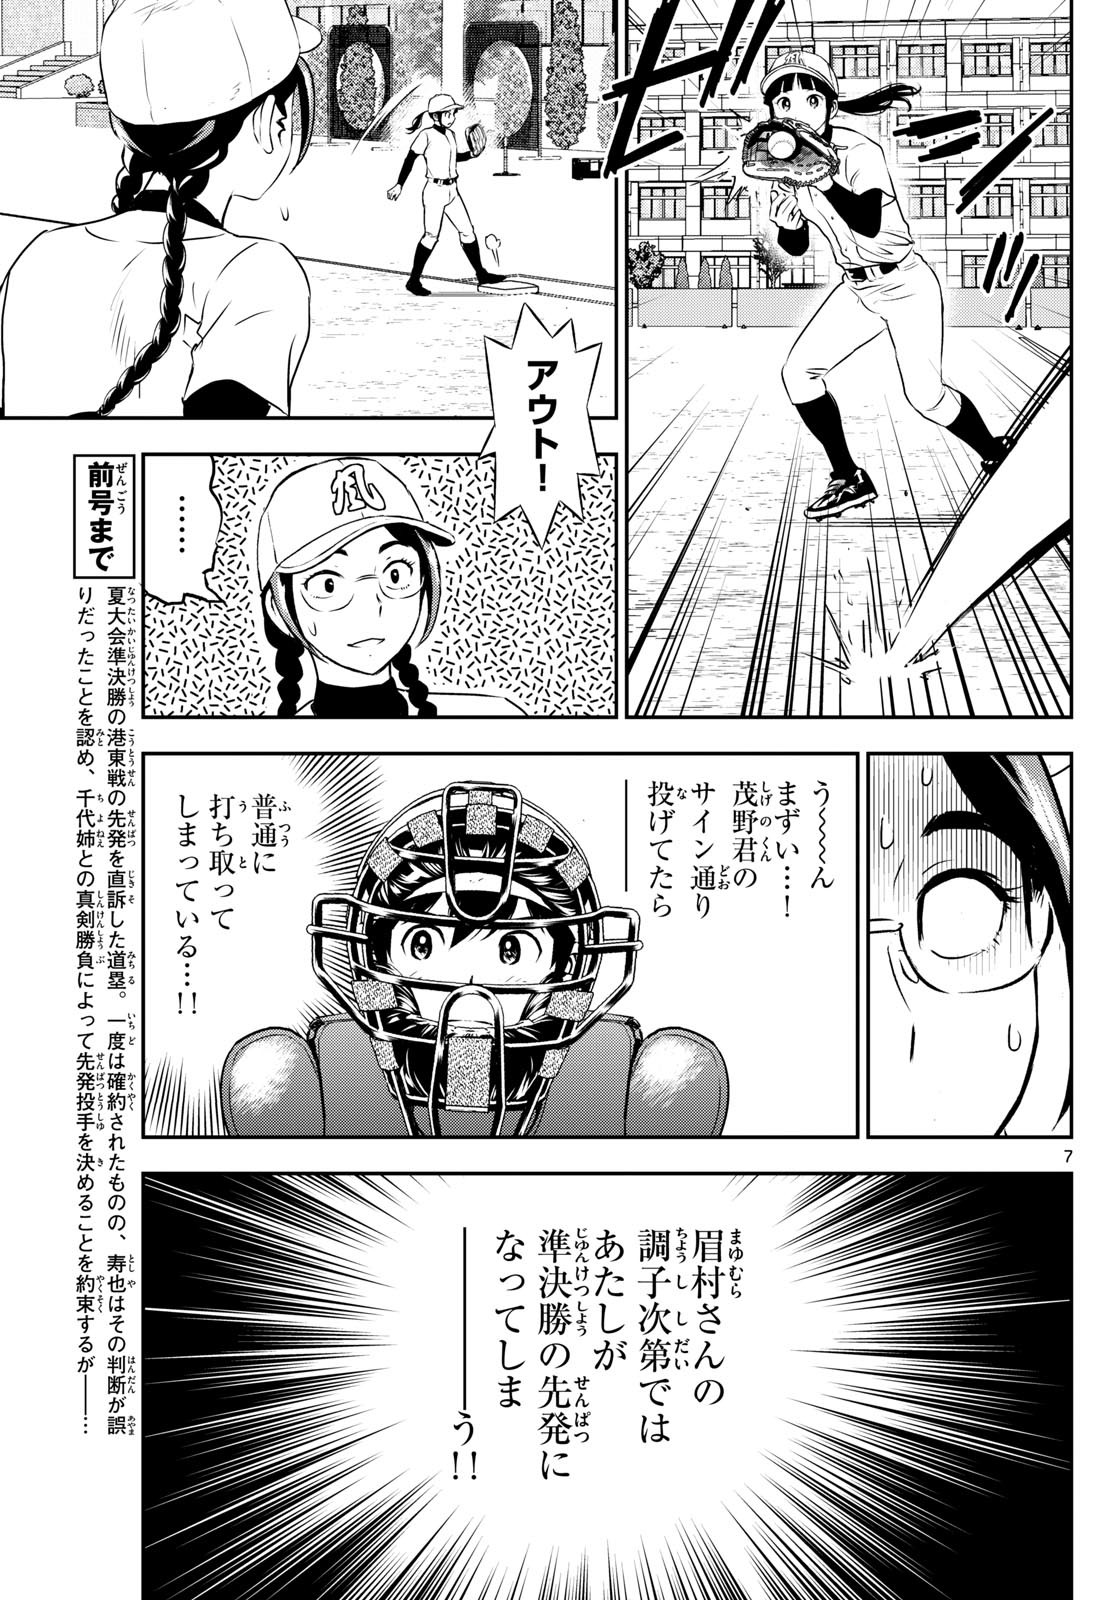 Major 2nd - メジャーセカンド - Chapter 280 - Page 7